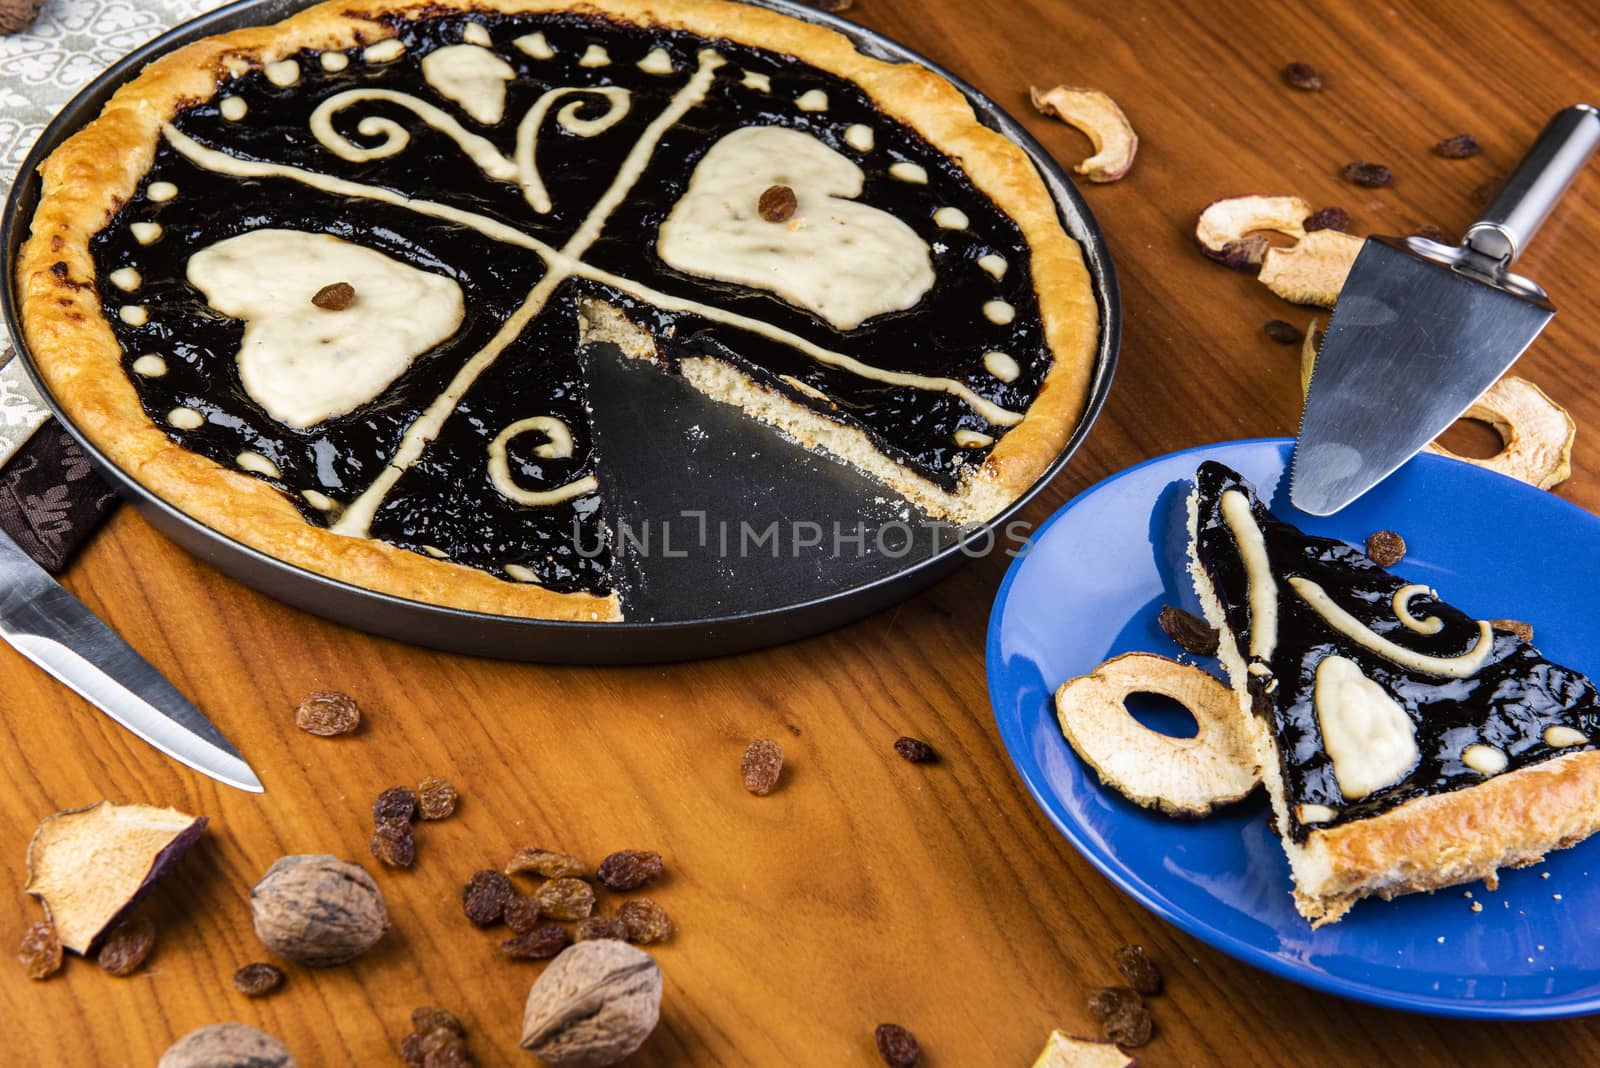 Czech traditional cake "kolac" on a wooden table by fyletto